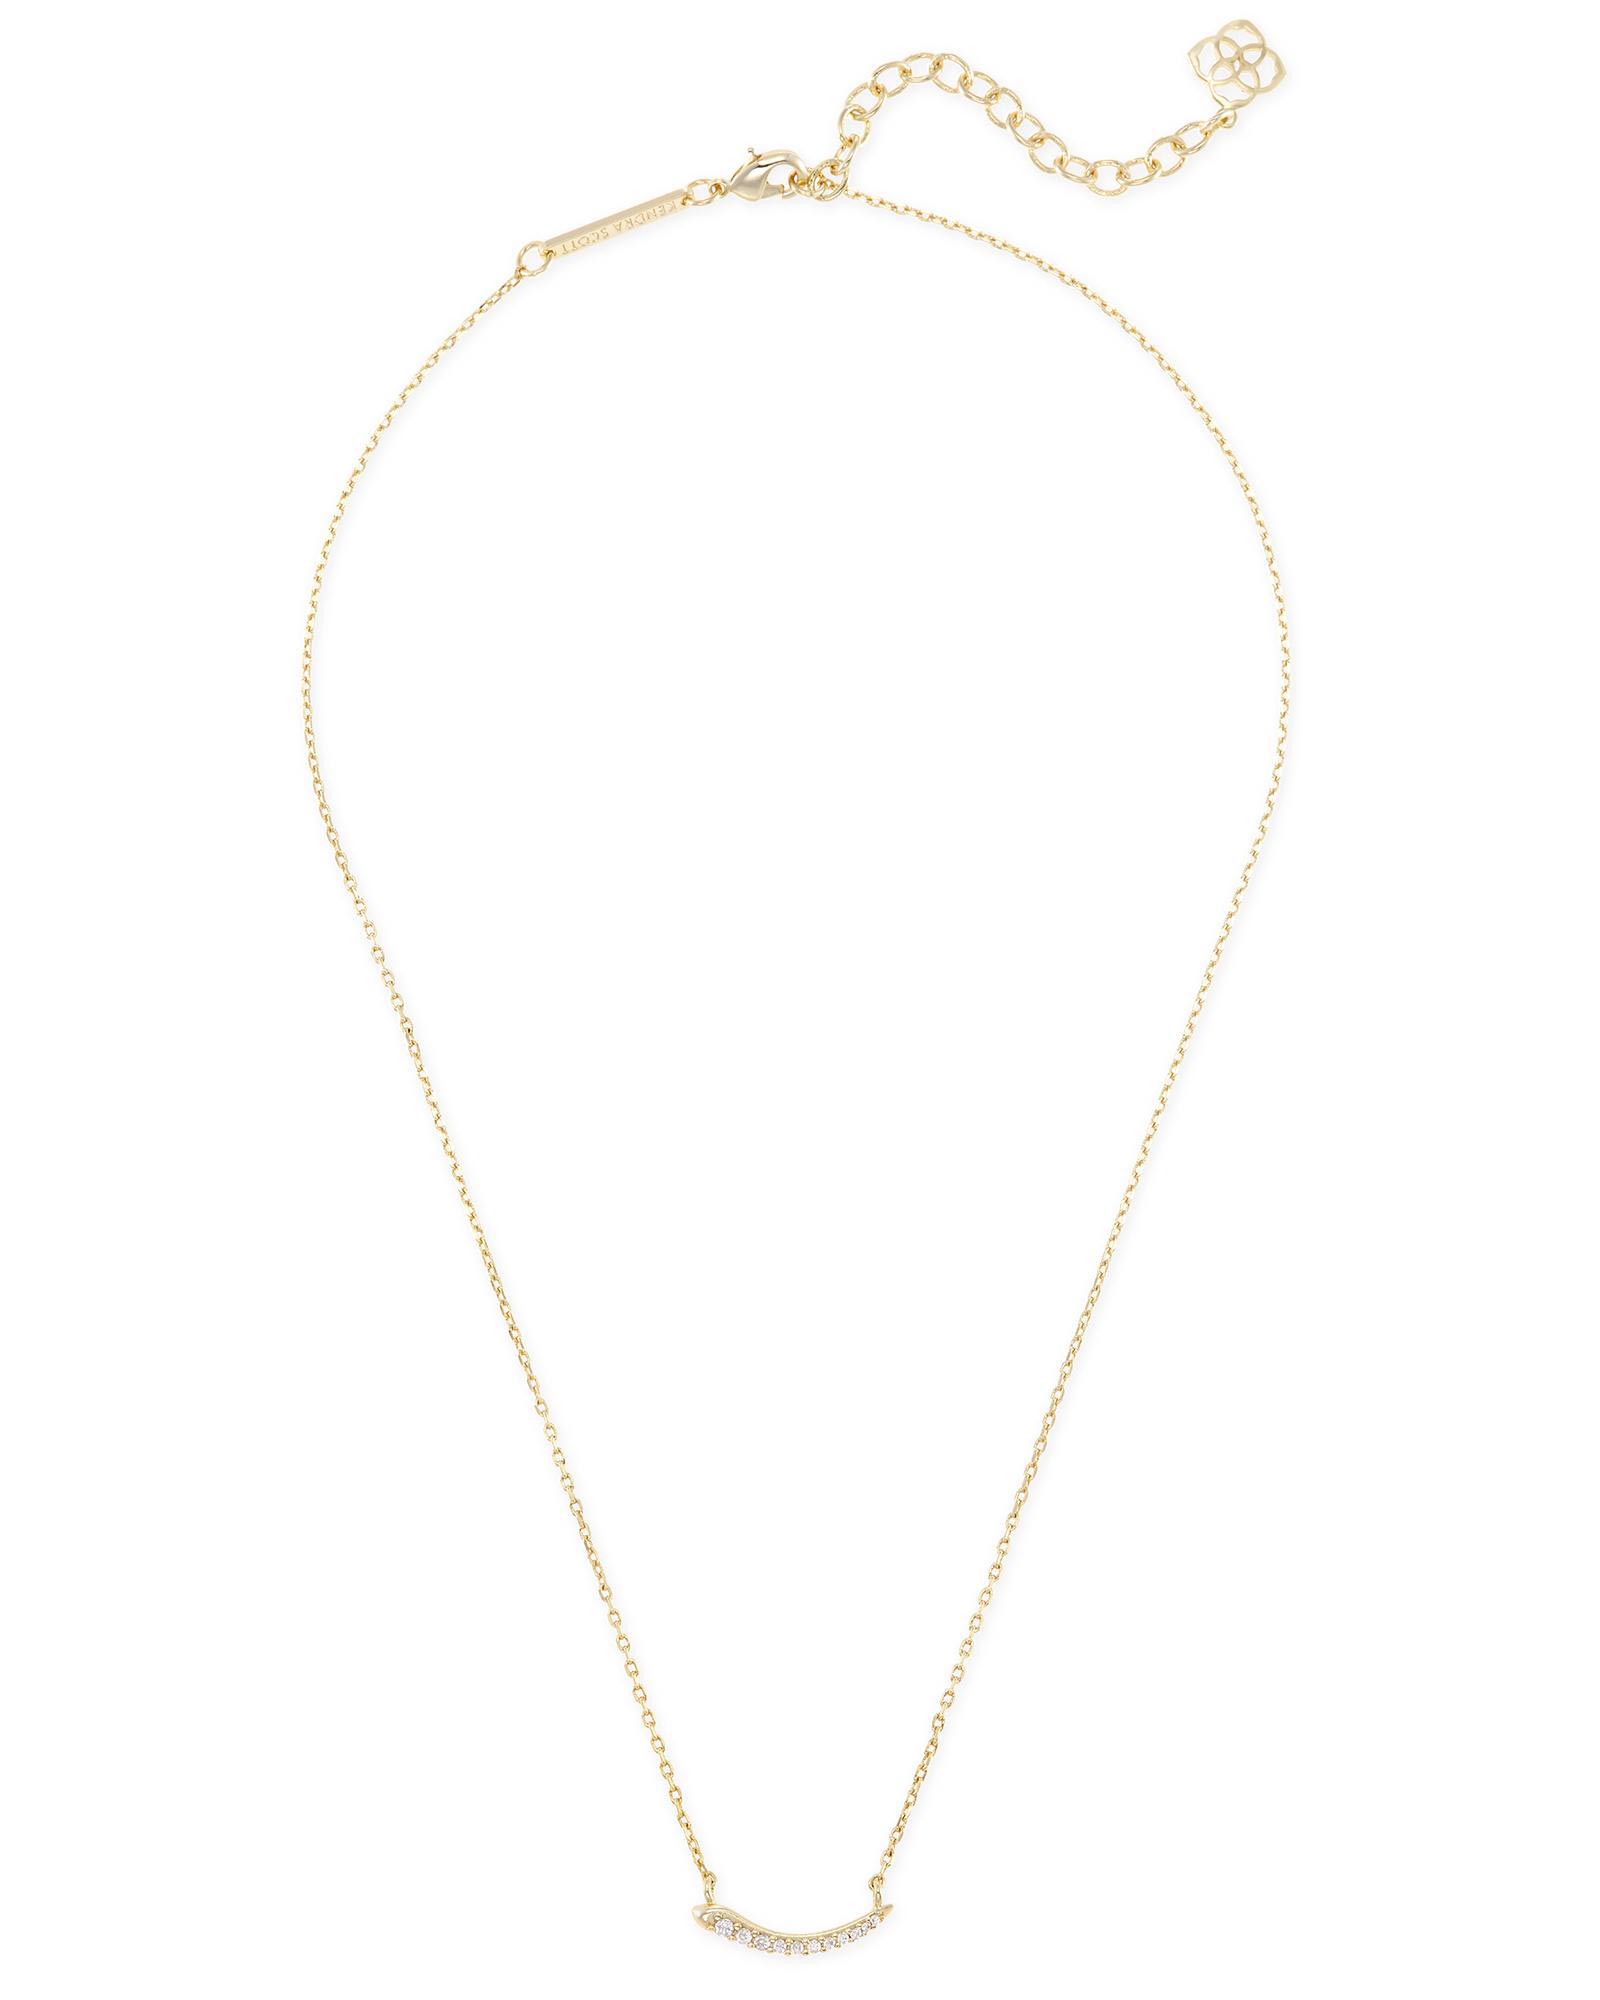 Whitlee Curved Bar Pendant Necklace in Gold | Kendra Scott